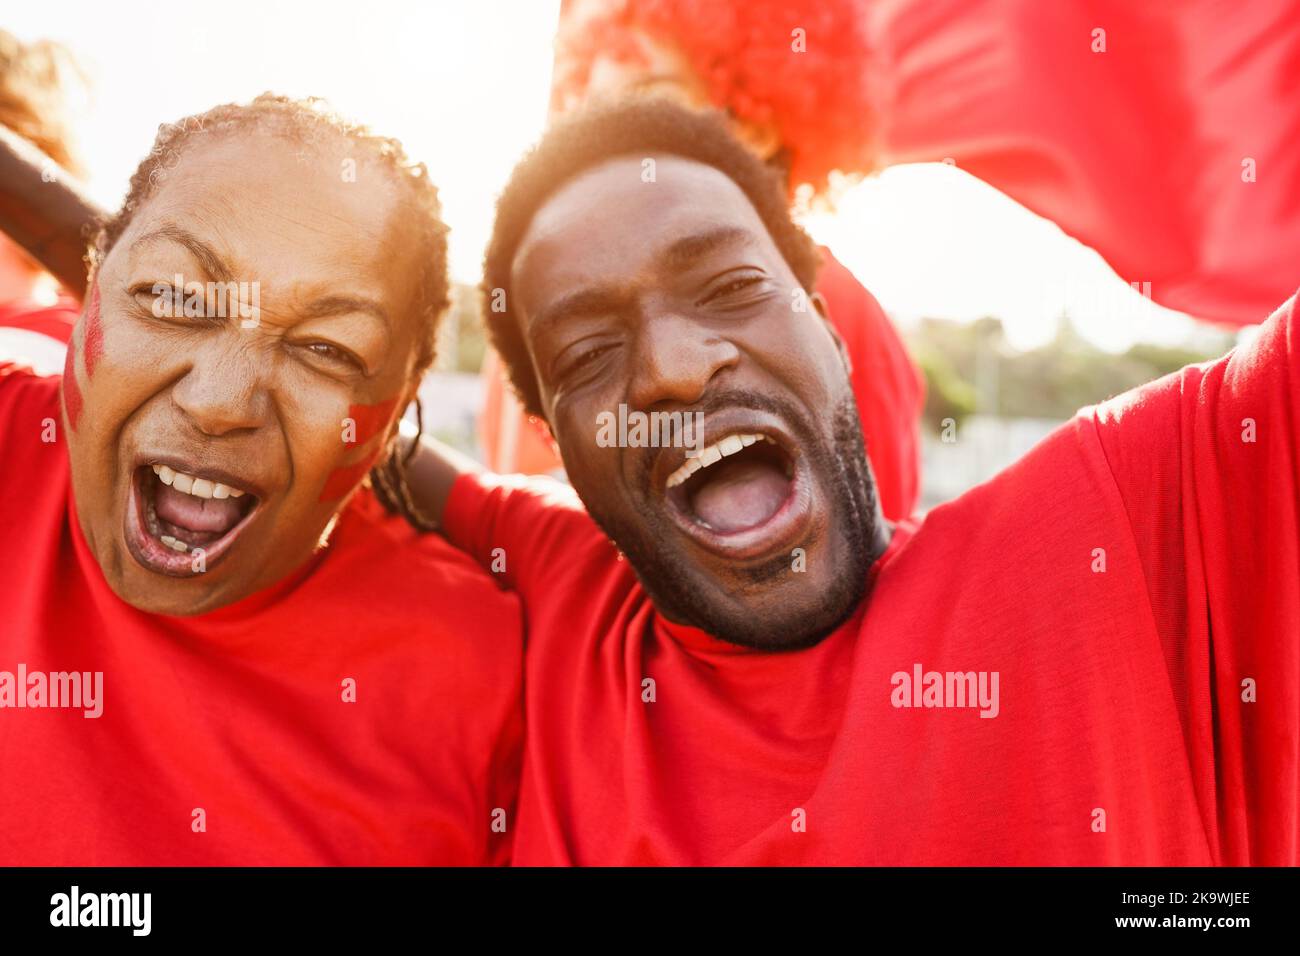 African red sport fans screaming while supporting their team - Football supporters having fun at competion event - Champions and winning concept - Foc Stock Photo